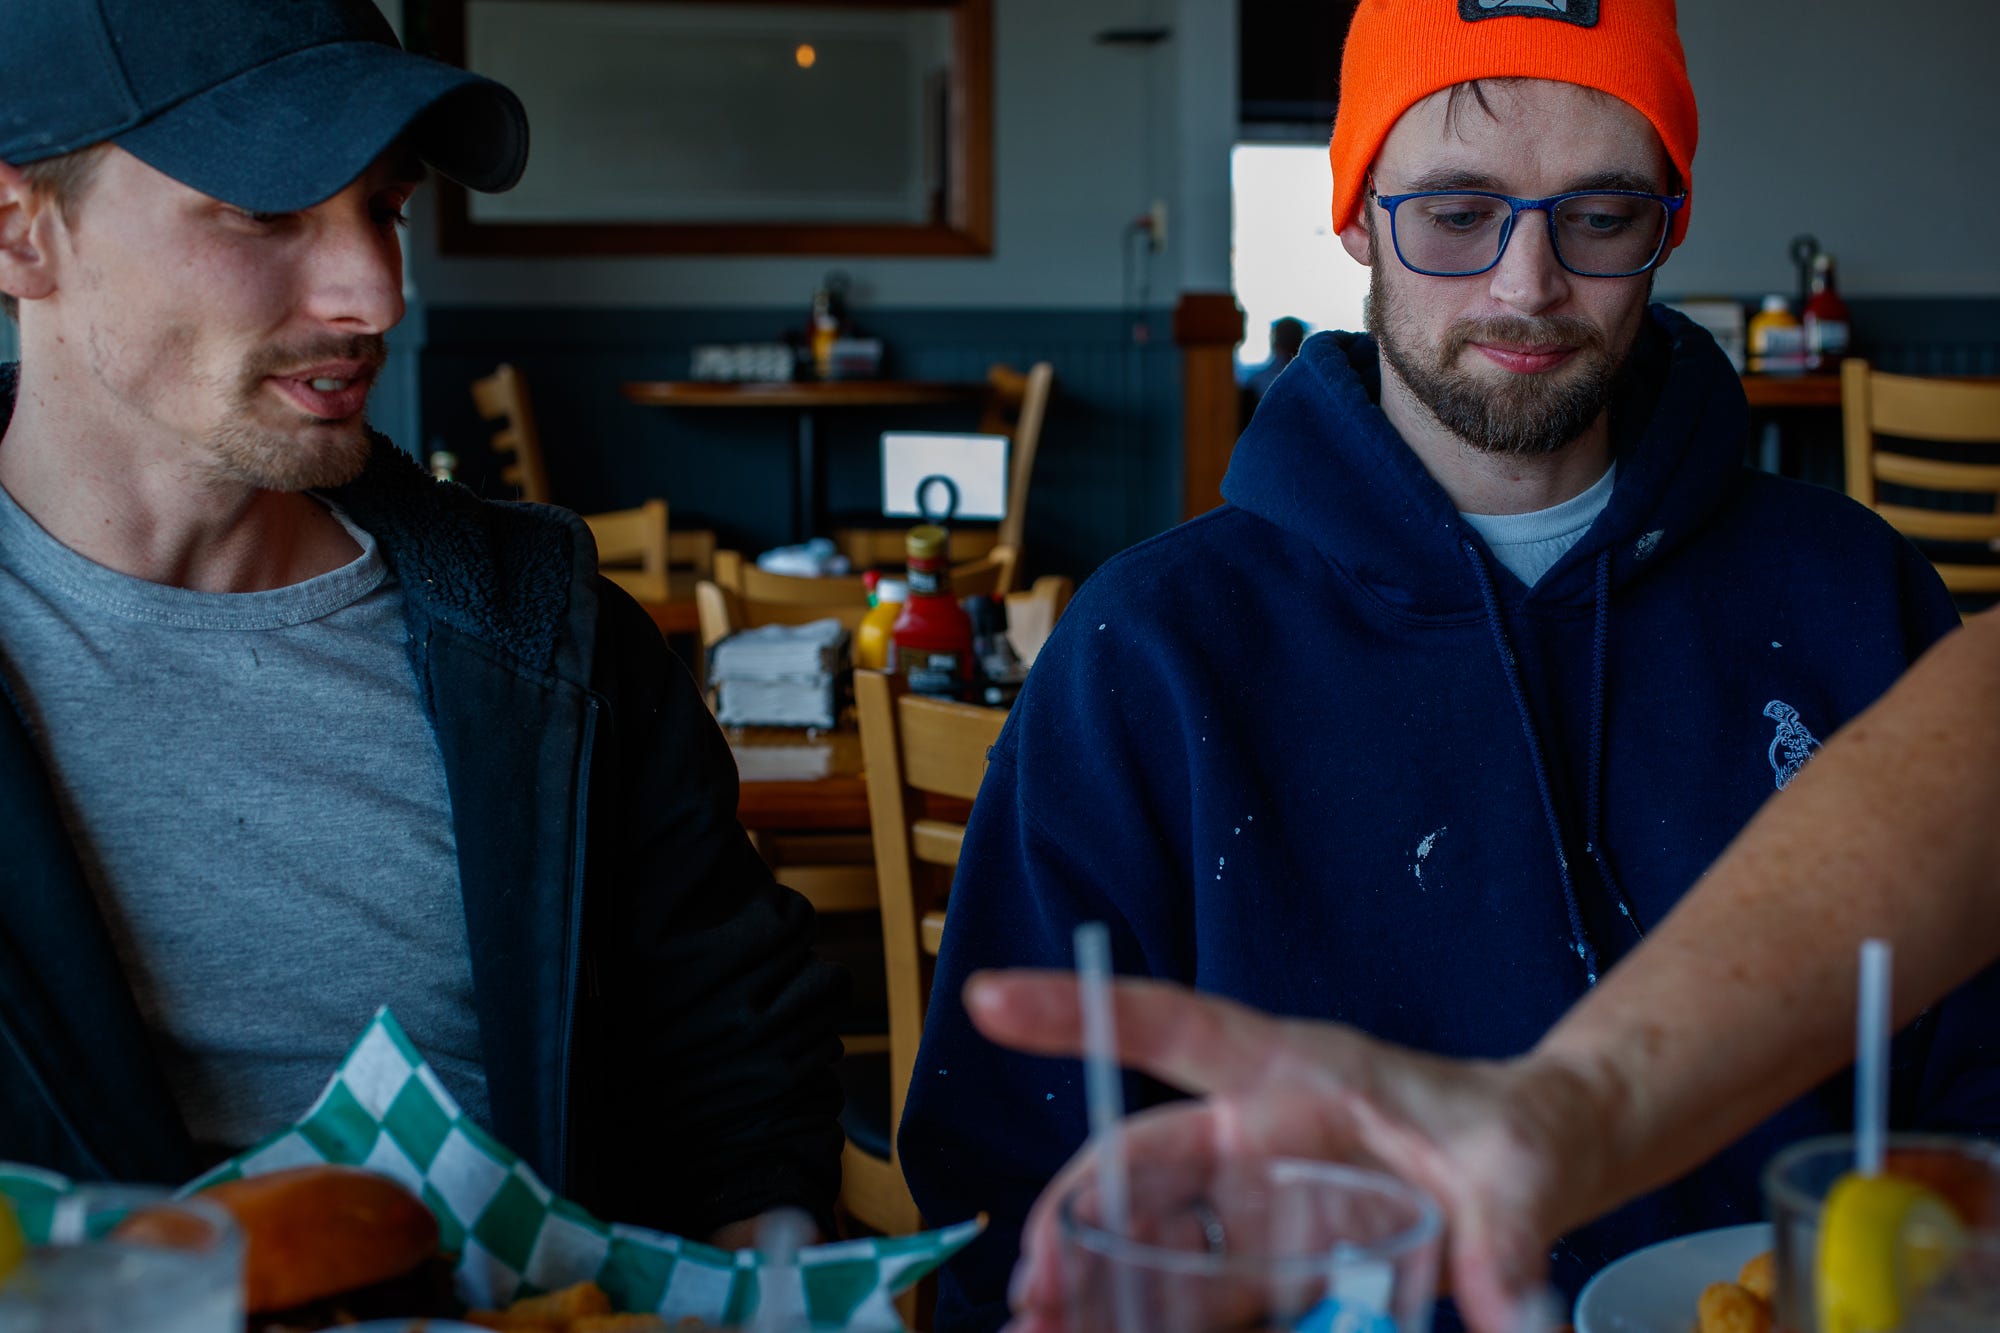 Tanner McAfee (left) and Kyle Ferguson eat at Sports Time Family Pub & Grill in Elkhart, Indiana, earlier this year. The friends were on break from a painting job after calling it quits in the RV industry.